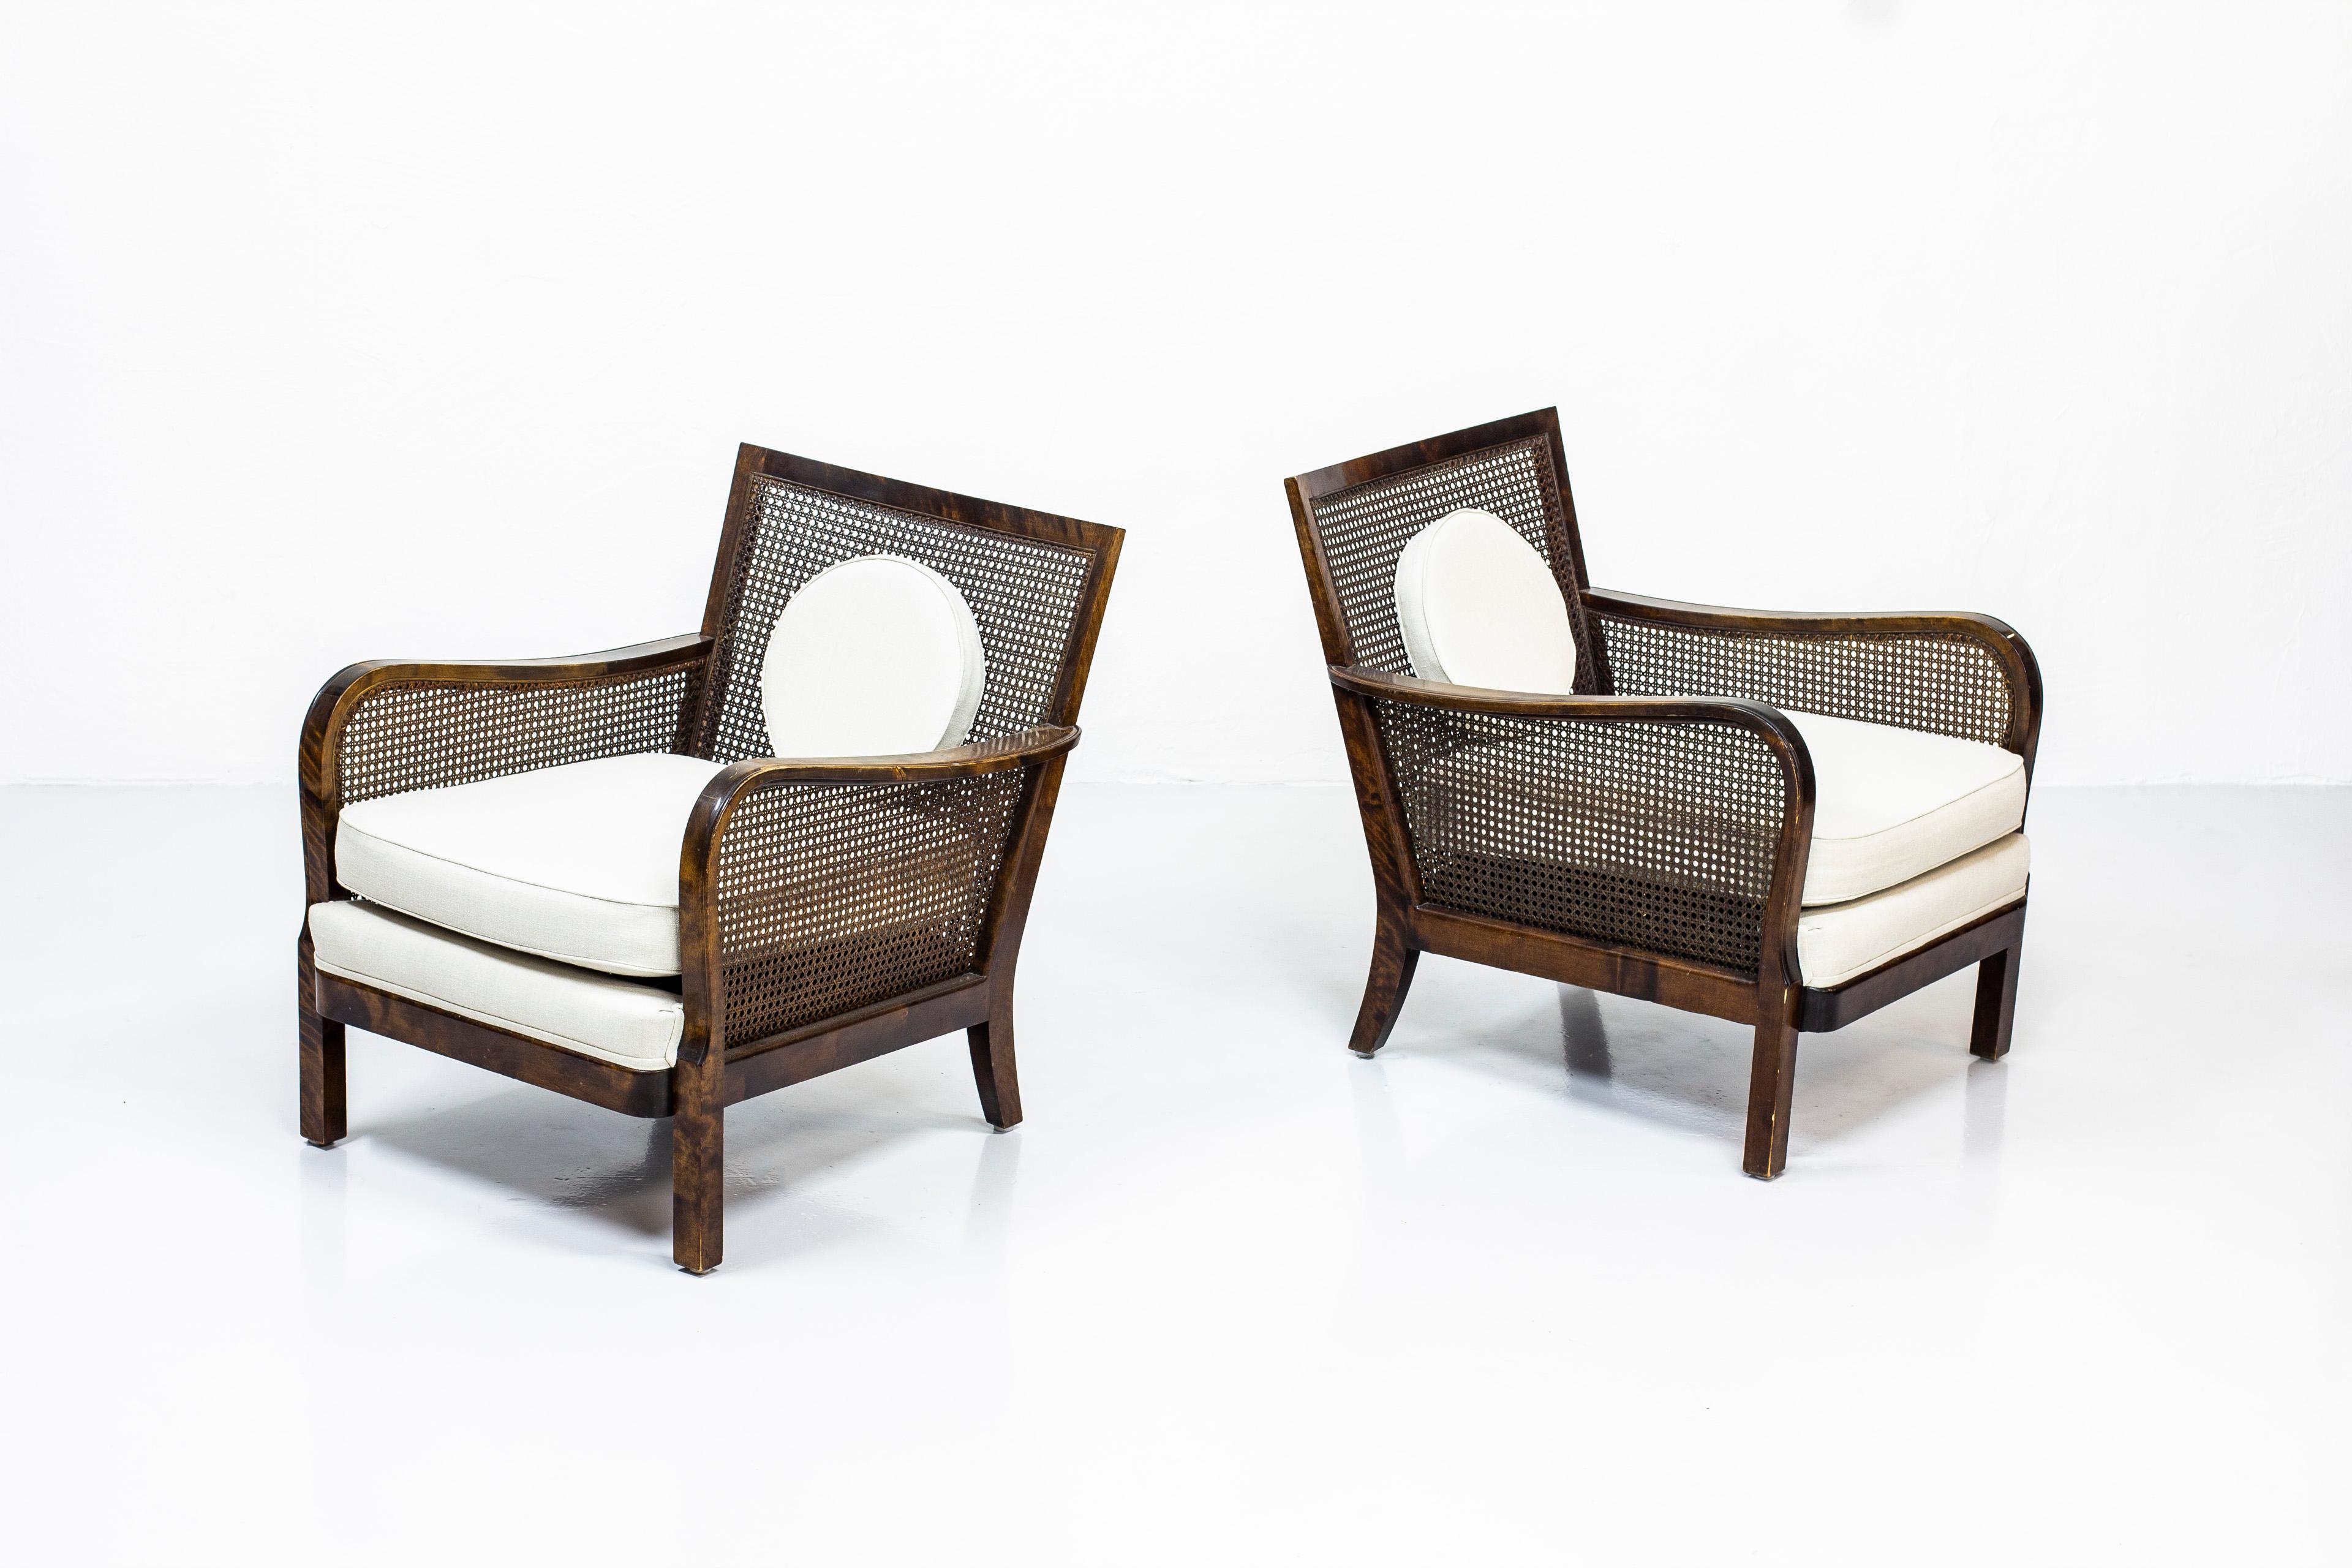 Pair of lounge chairs attributed to Otto Schulz. Most likely produced by Boet in Gothenburg, Sweden during the 1930s-1940s. Made from stained birch and rattan. With New linnen upholstery. Very good vintage condition with light age related wear and